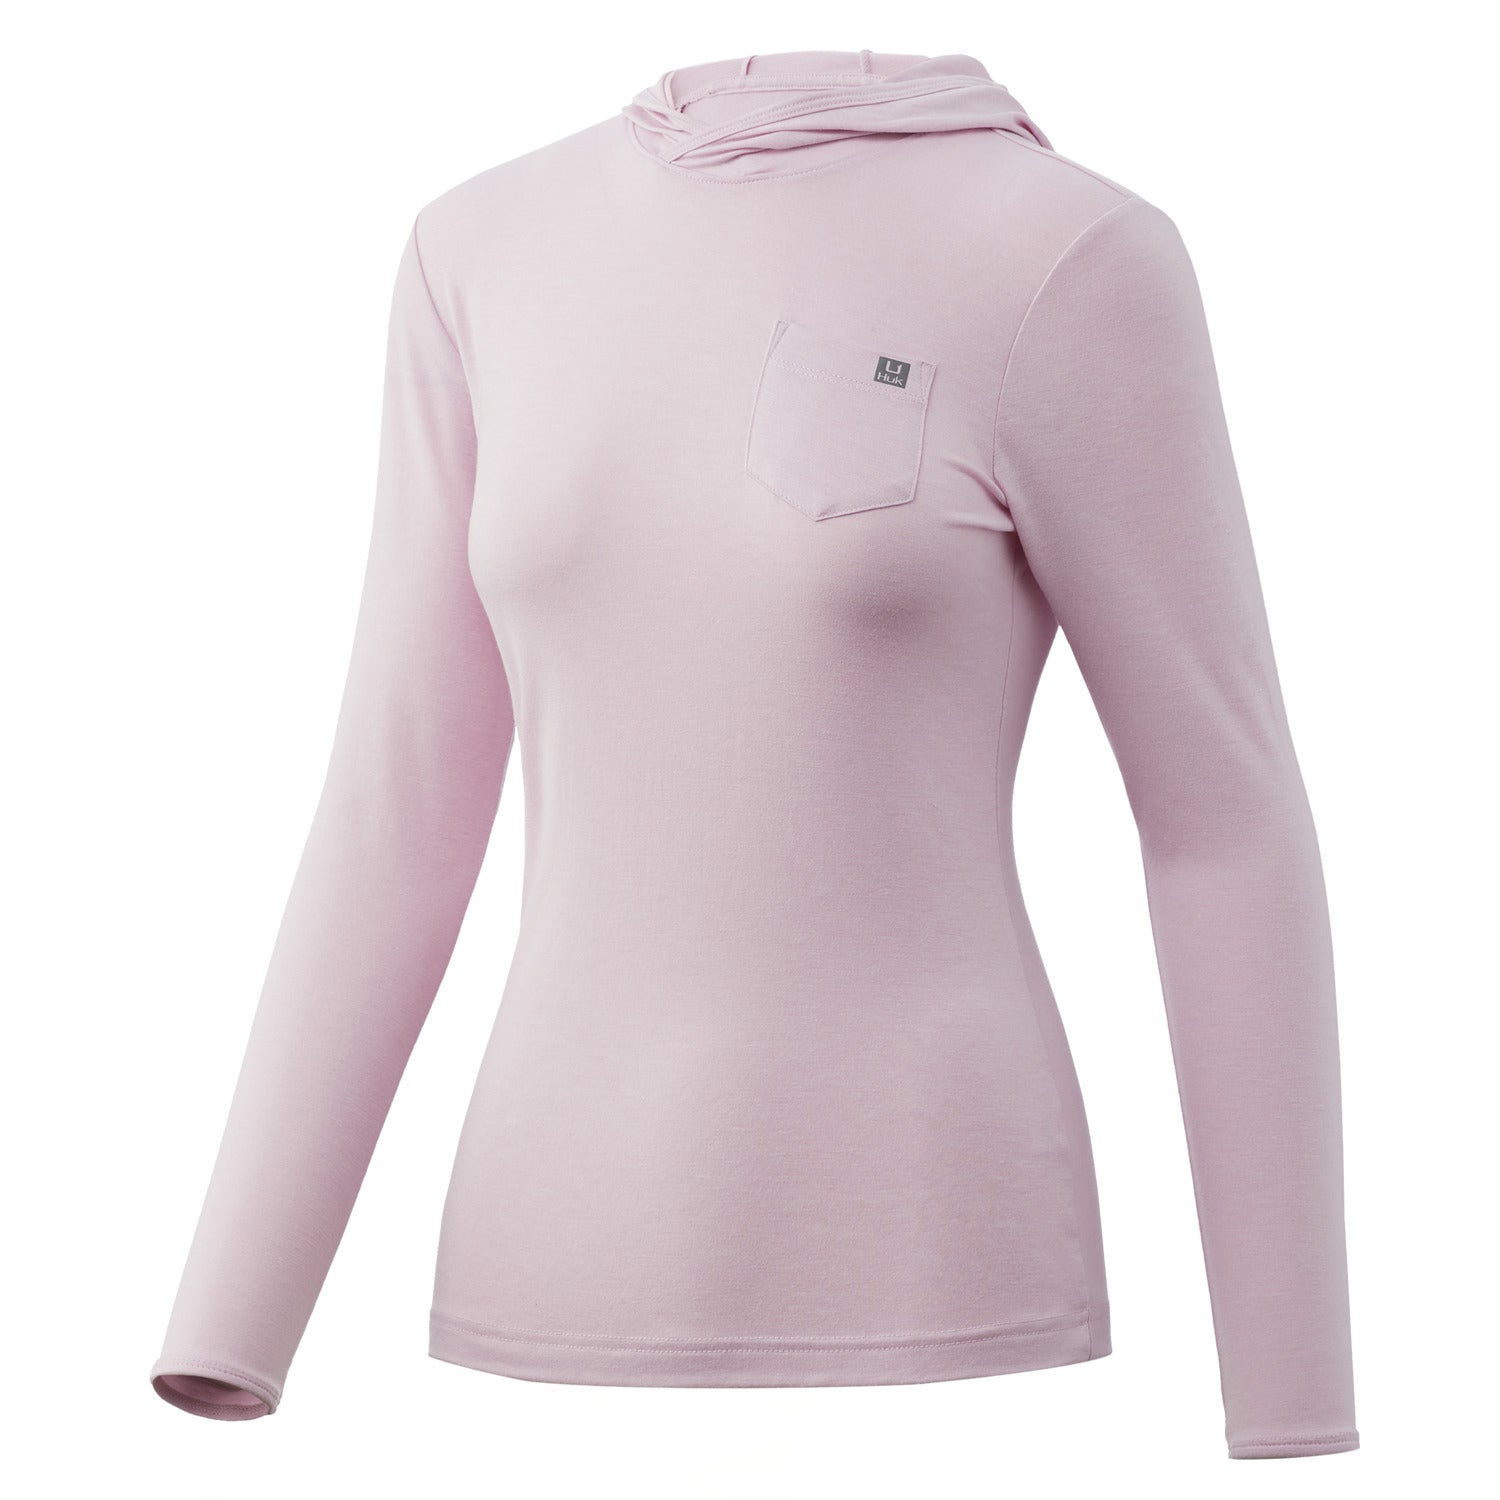 W Huk Waypoint Hoodie in Pink Lady color from the front